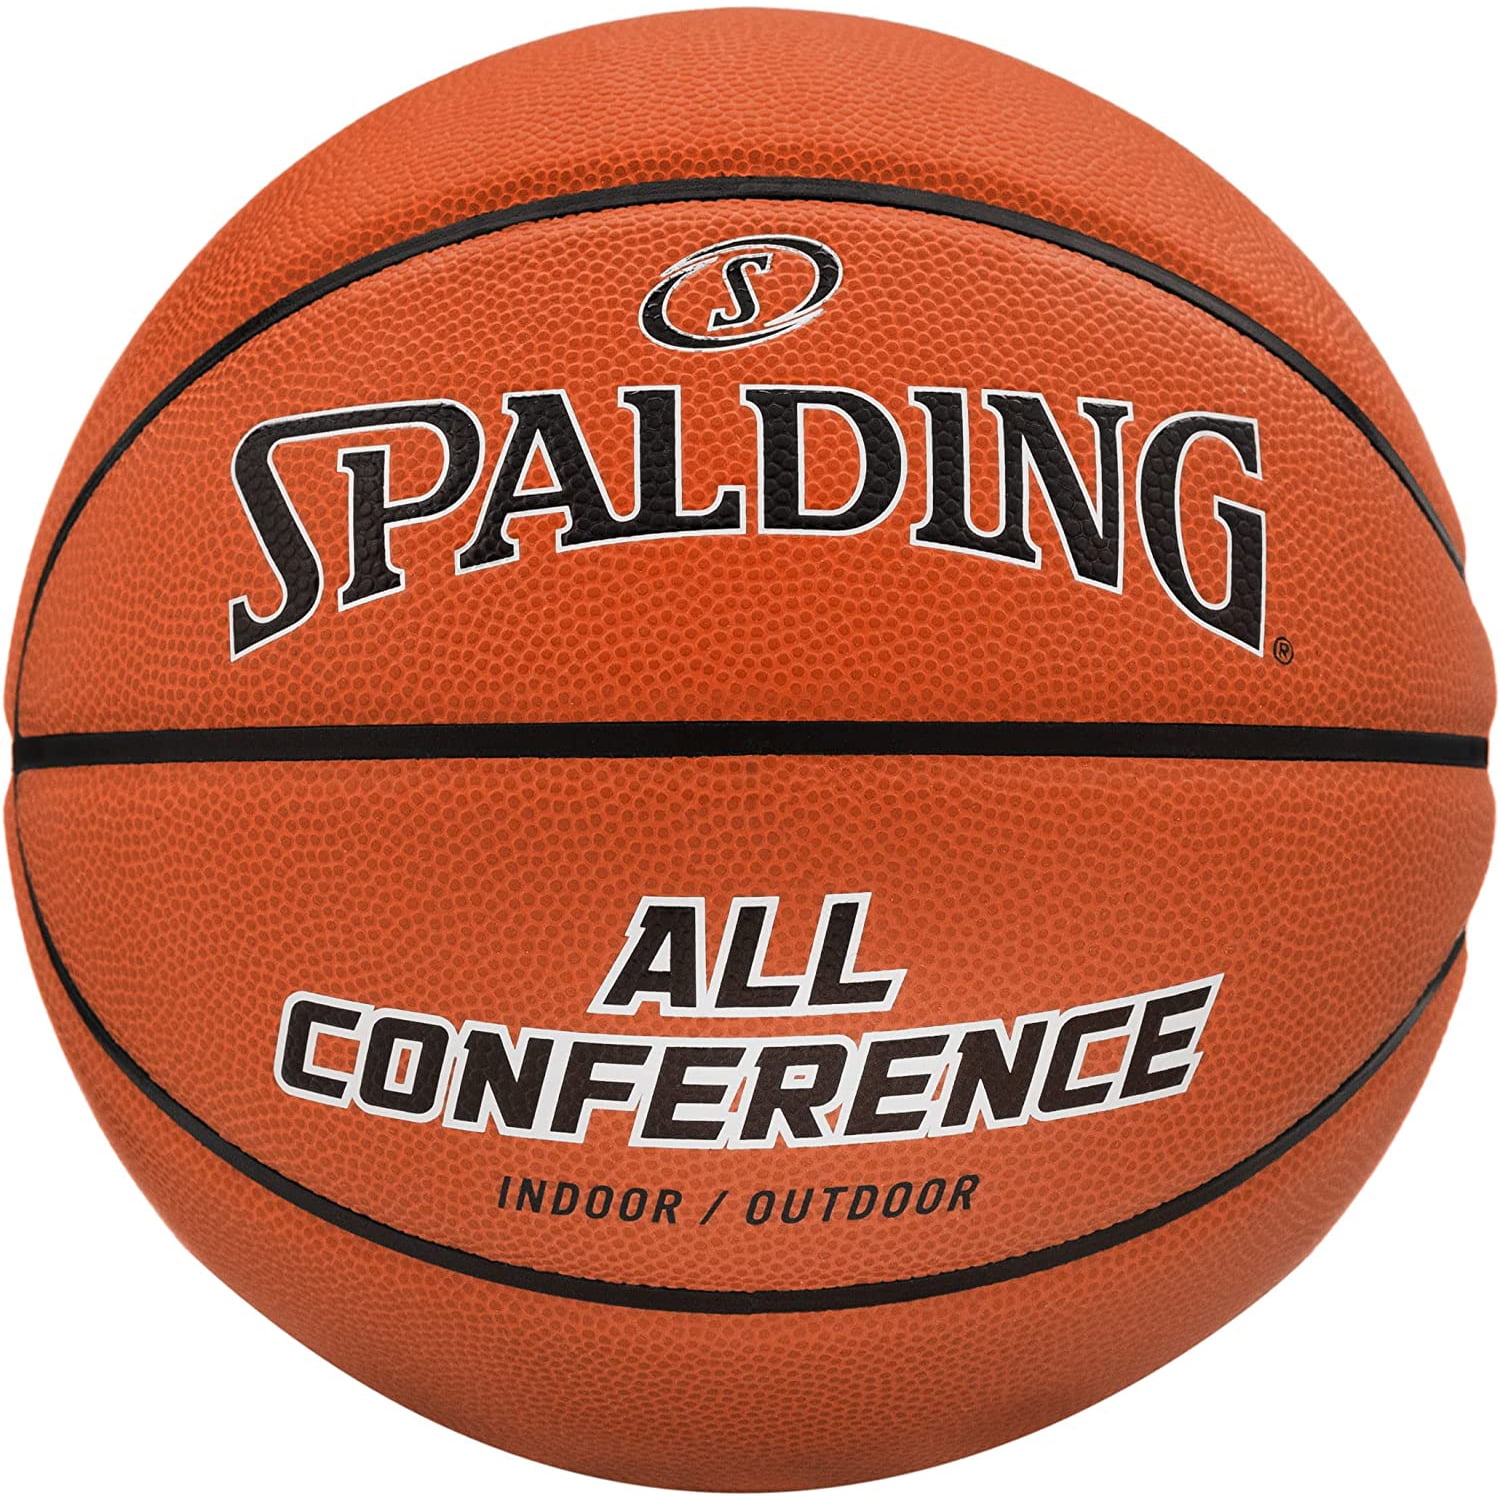 Spalding All Conference Indoor/Outdoor Basketball - 28.5